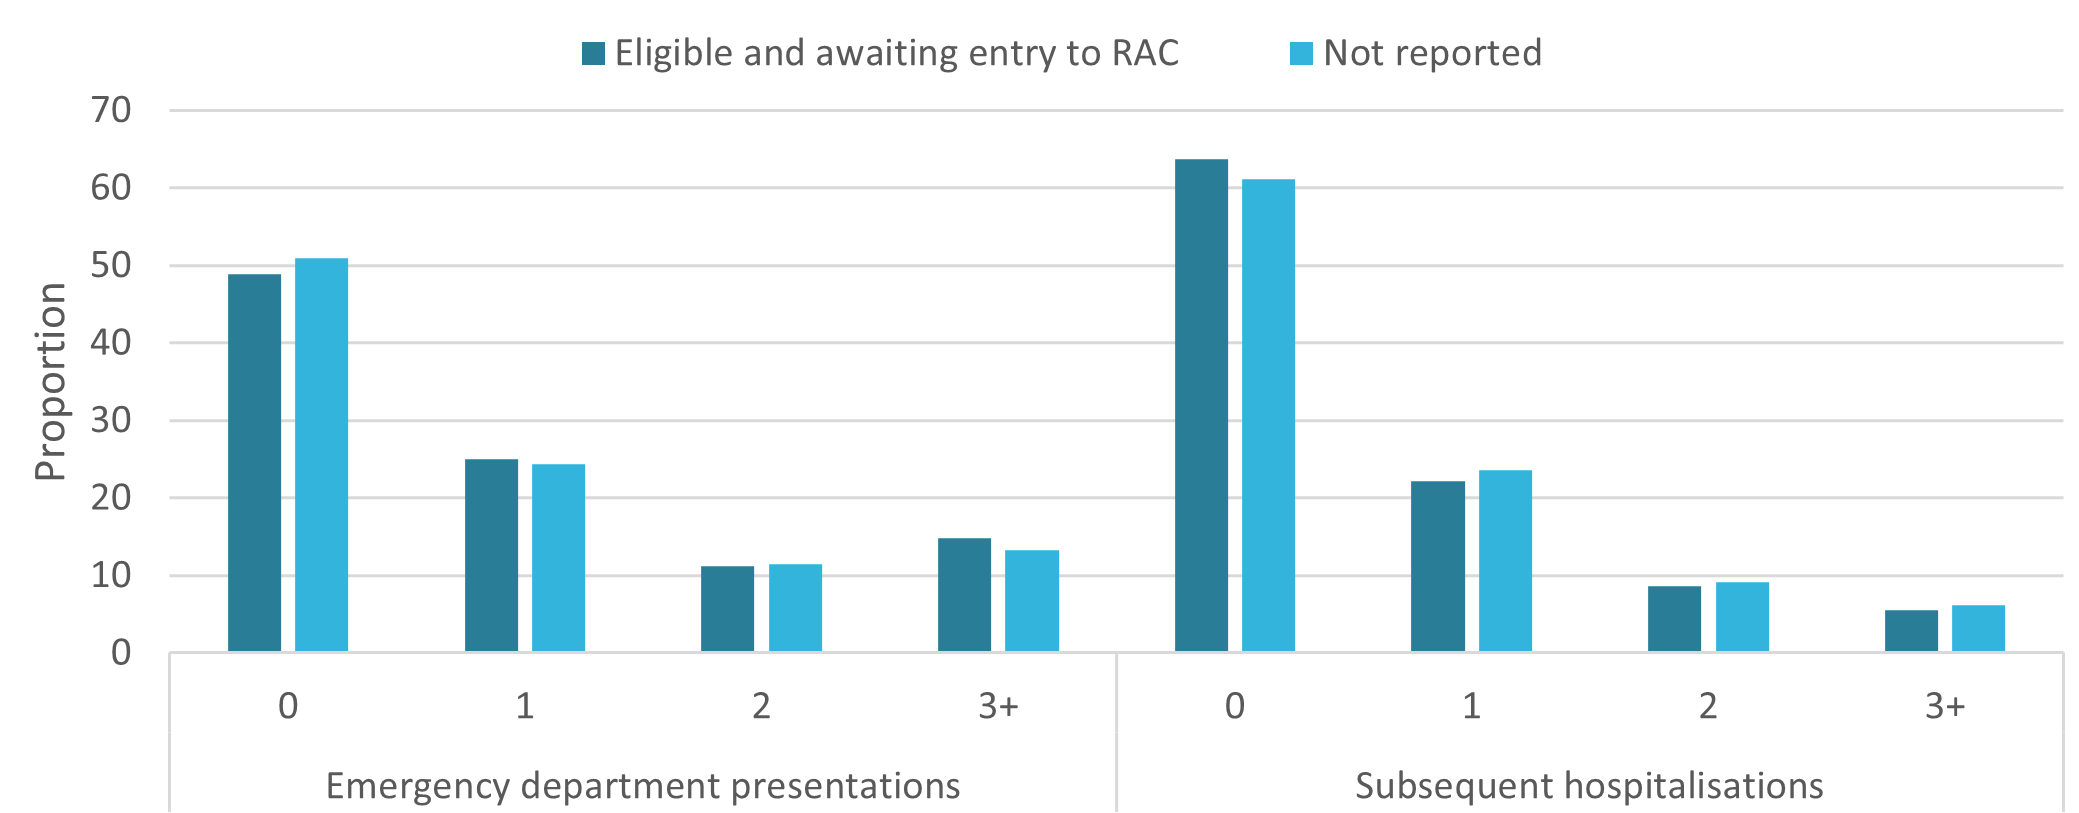 The figure is a bar chart and shows that the number of emergency department presentations and subsequent hospitalisations was similar for people who were or reported to be eligible and awaiting entry to residential aged care during their hospitalisation and people who were not.